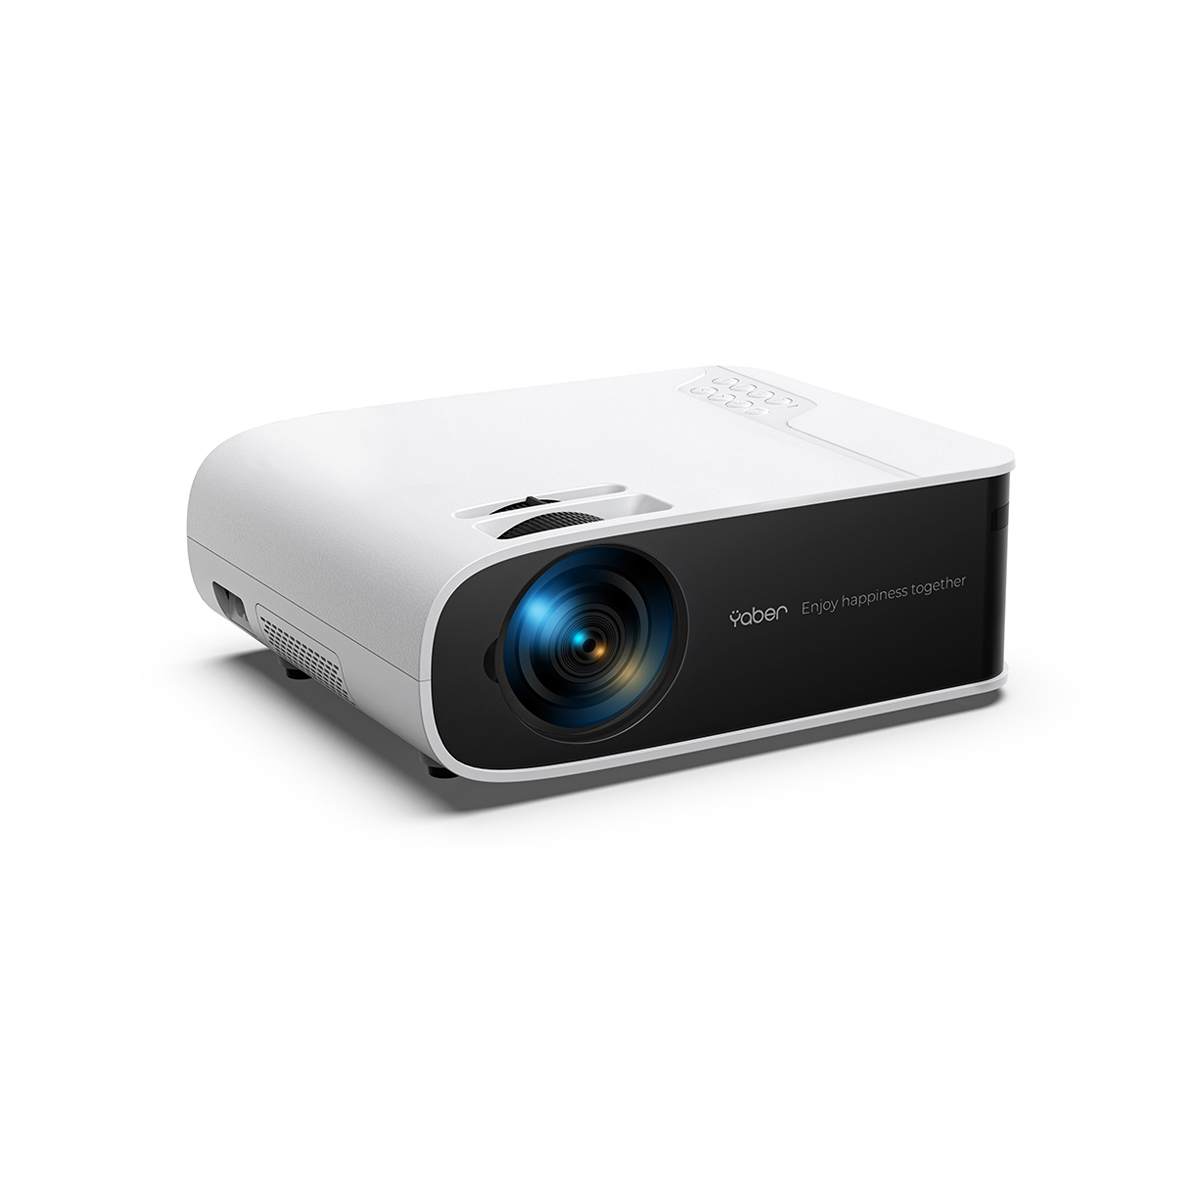 YABER PROJECTOR C450 - YABER Entertainment Projector